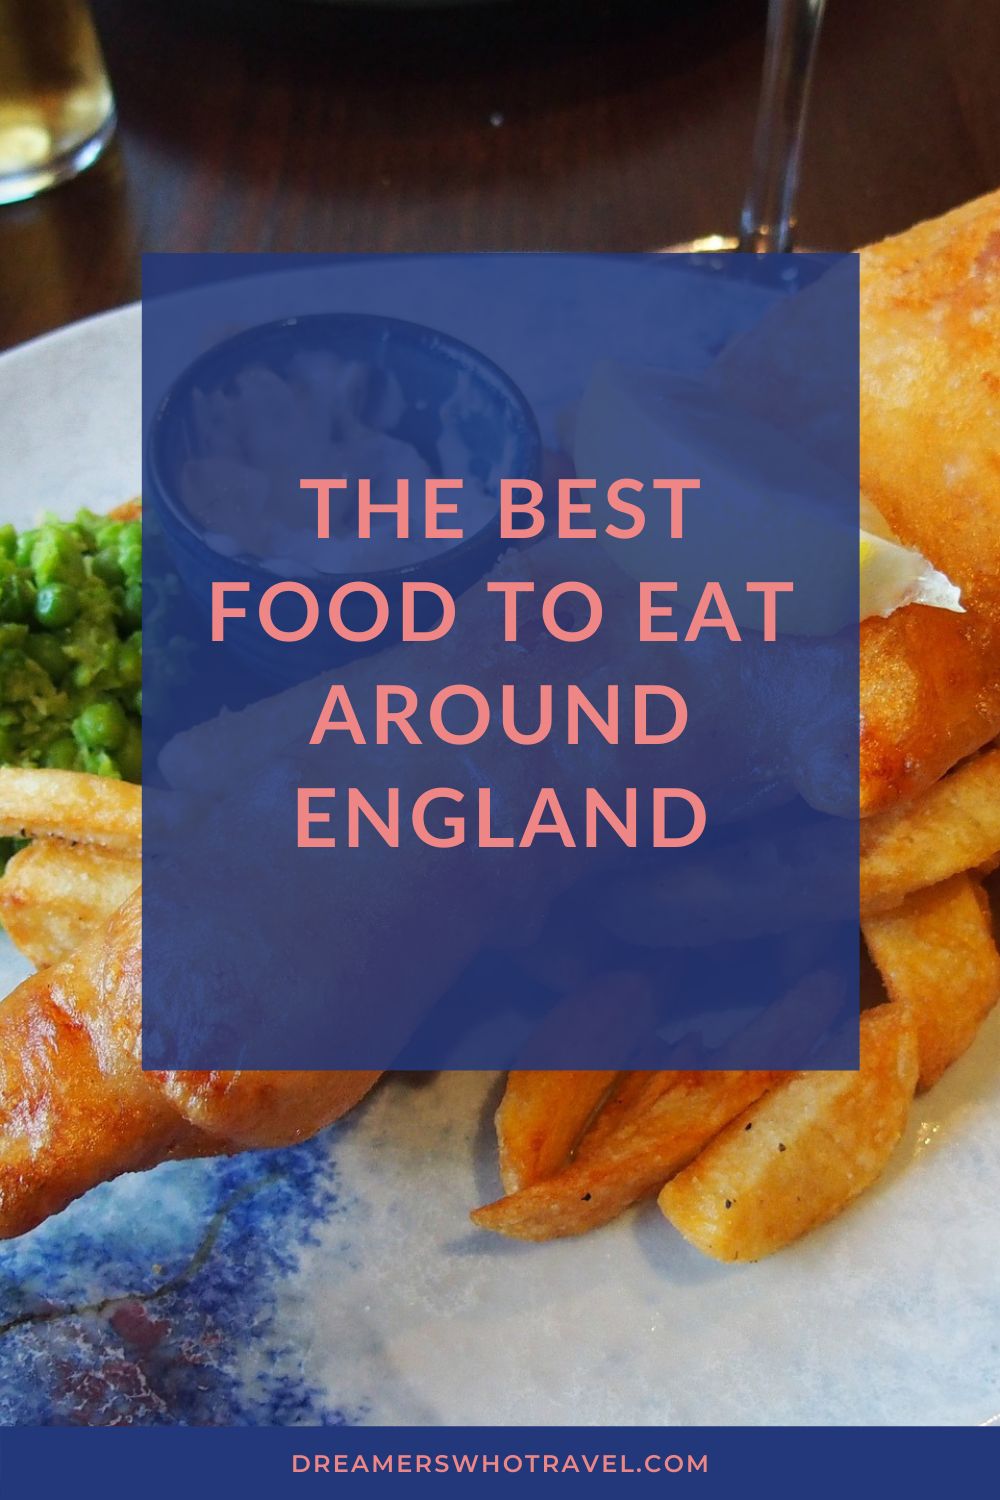 THE BEST FOOD TO EAT AROUND ENGLAND